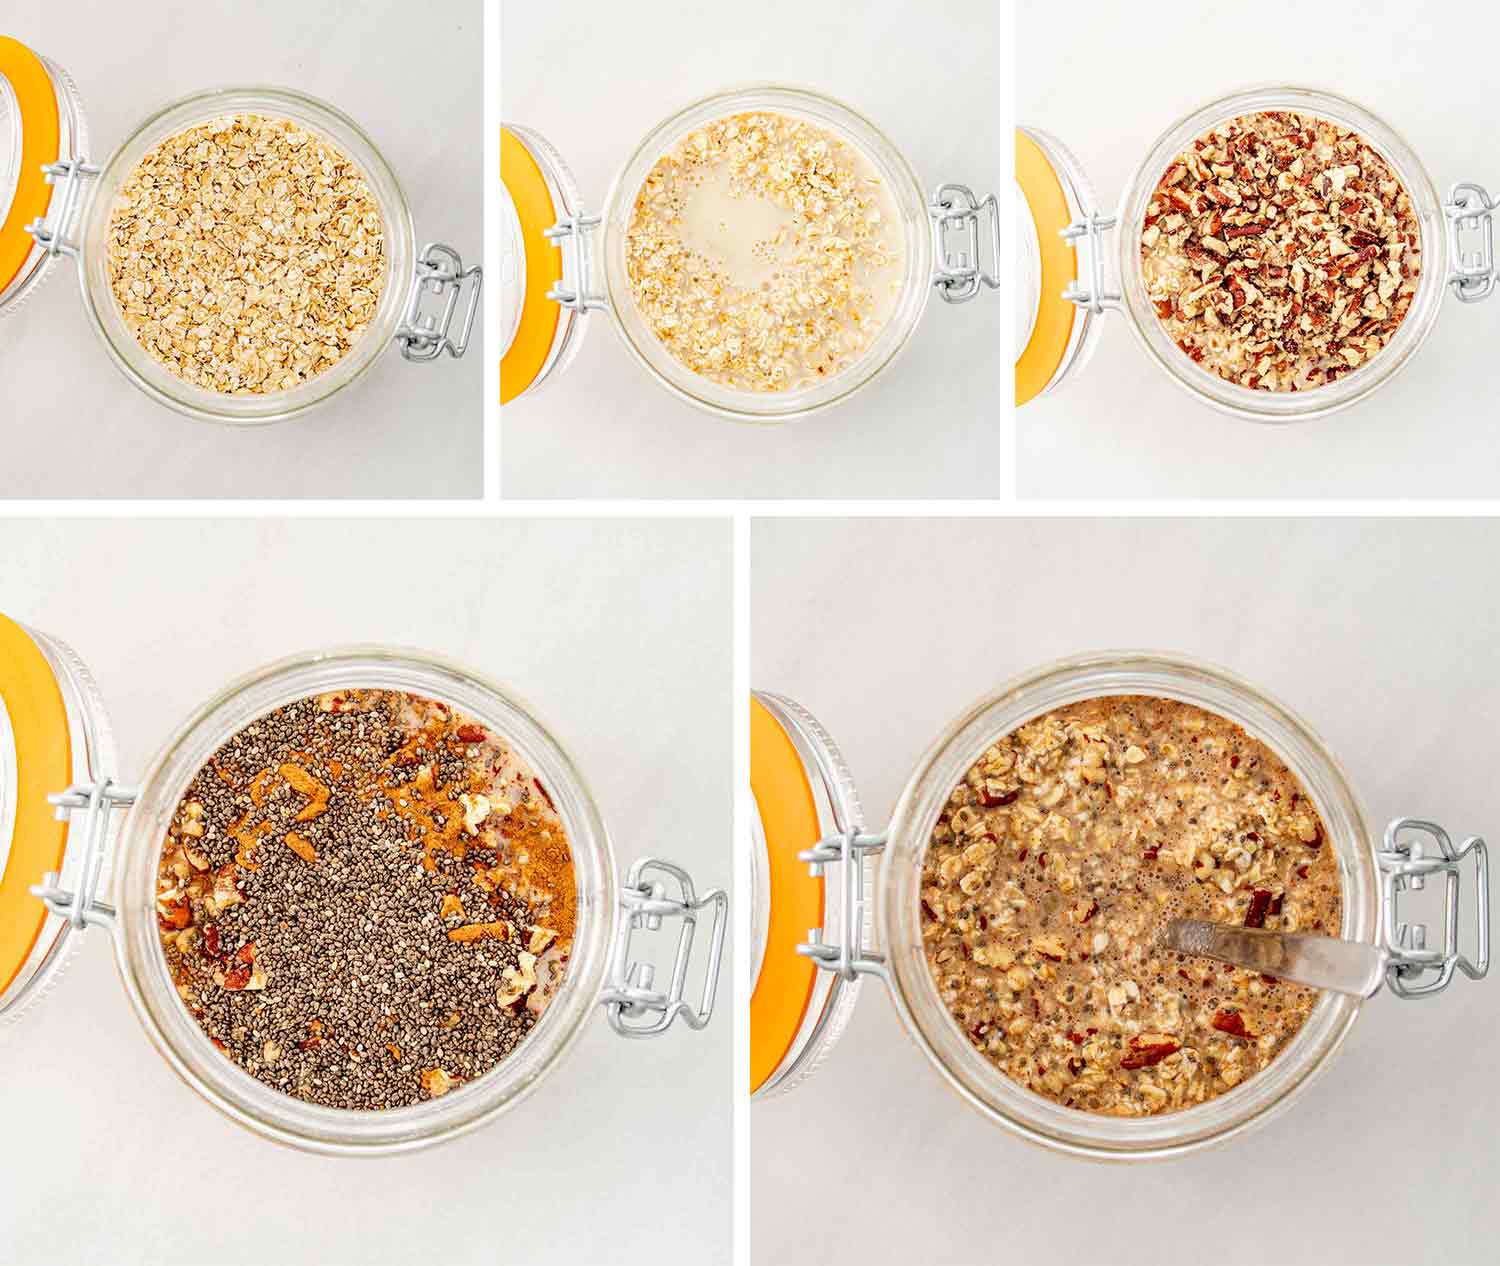 process shots showing how to make maple pecan overnight oats.